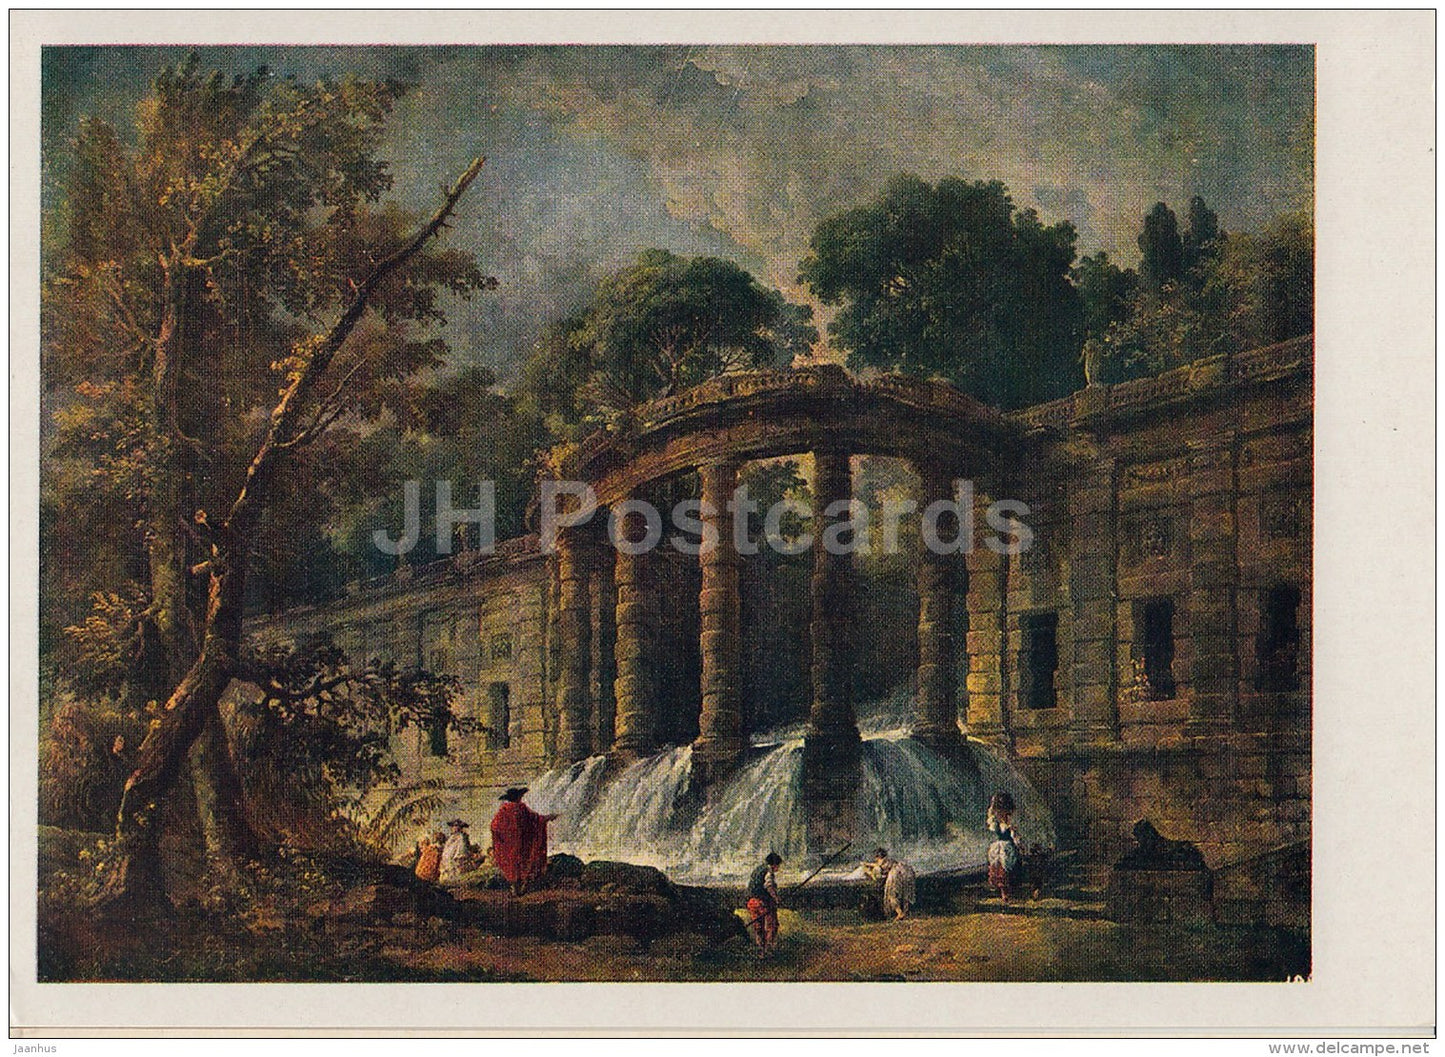 painting  by Hubert Robert - Cascade - French art - old postcard - Russia USSR - unused - JH Postcards